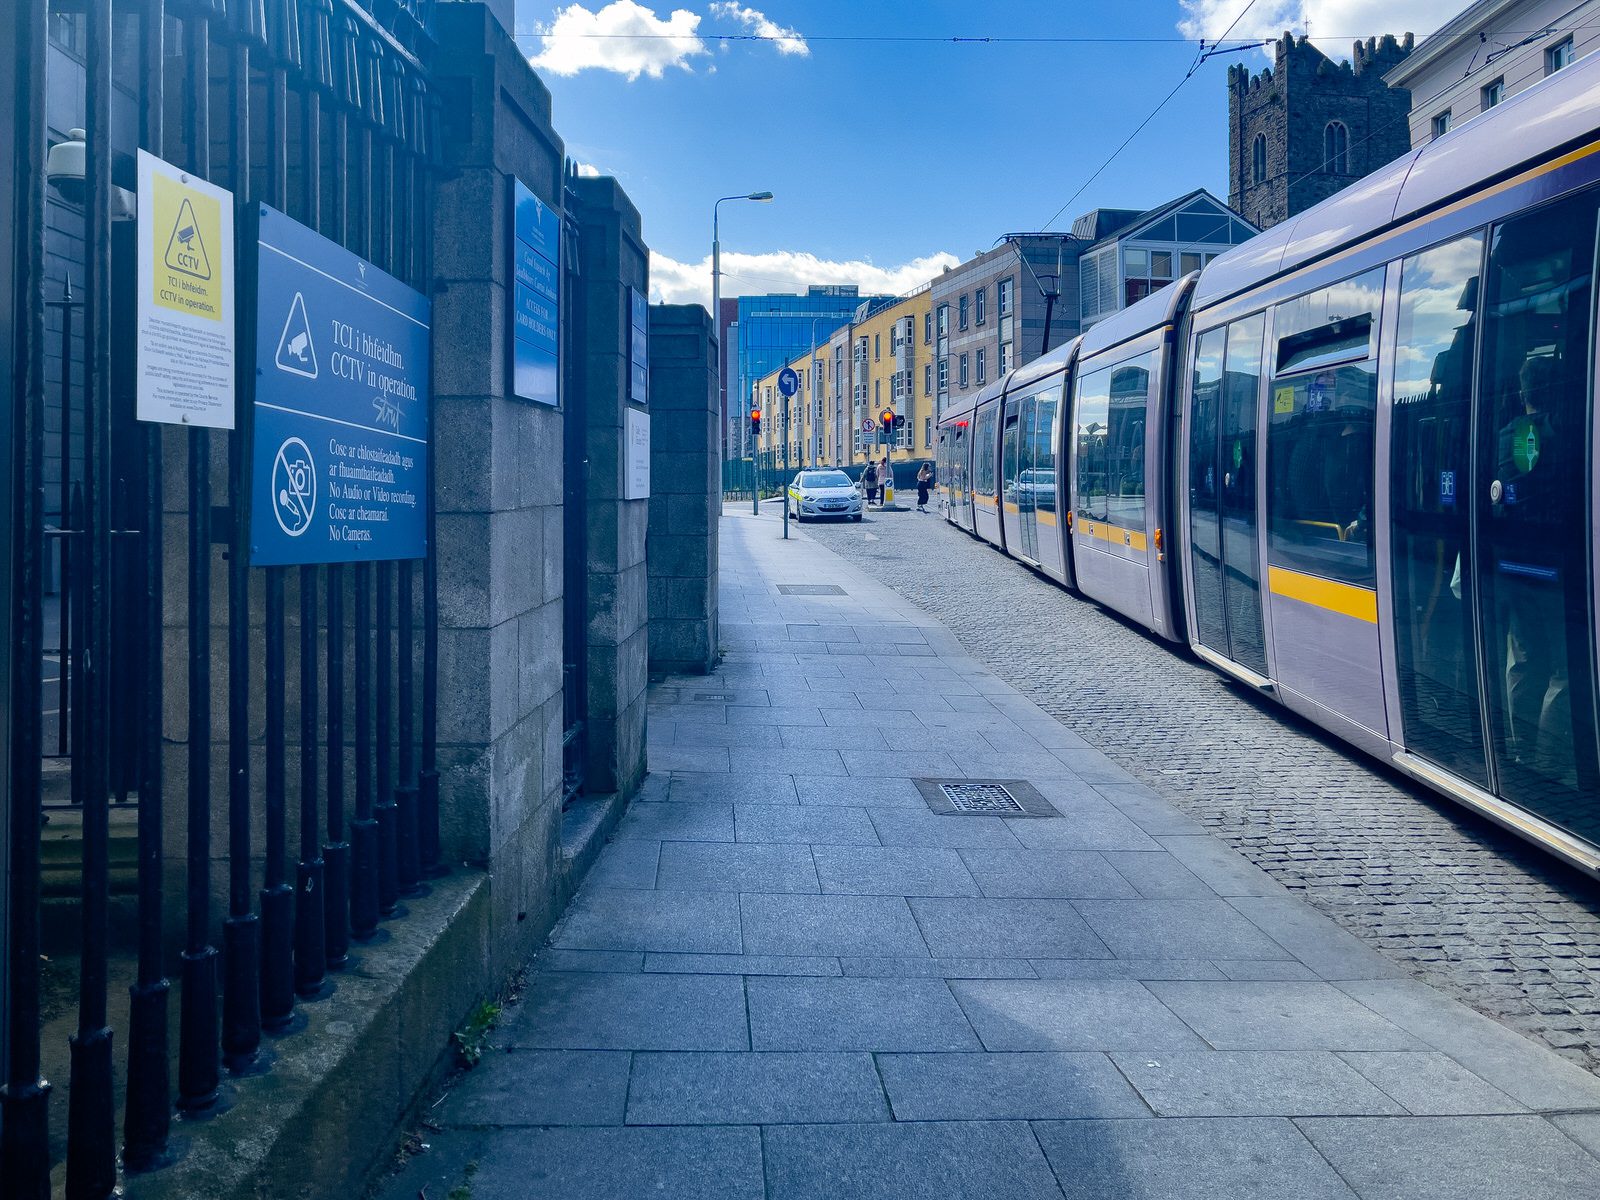 THE LUAS FOUR COURTS TRAM STOP [THERE IS MUCH TO BE SEEN HERE]-234124-1